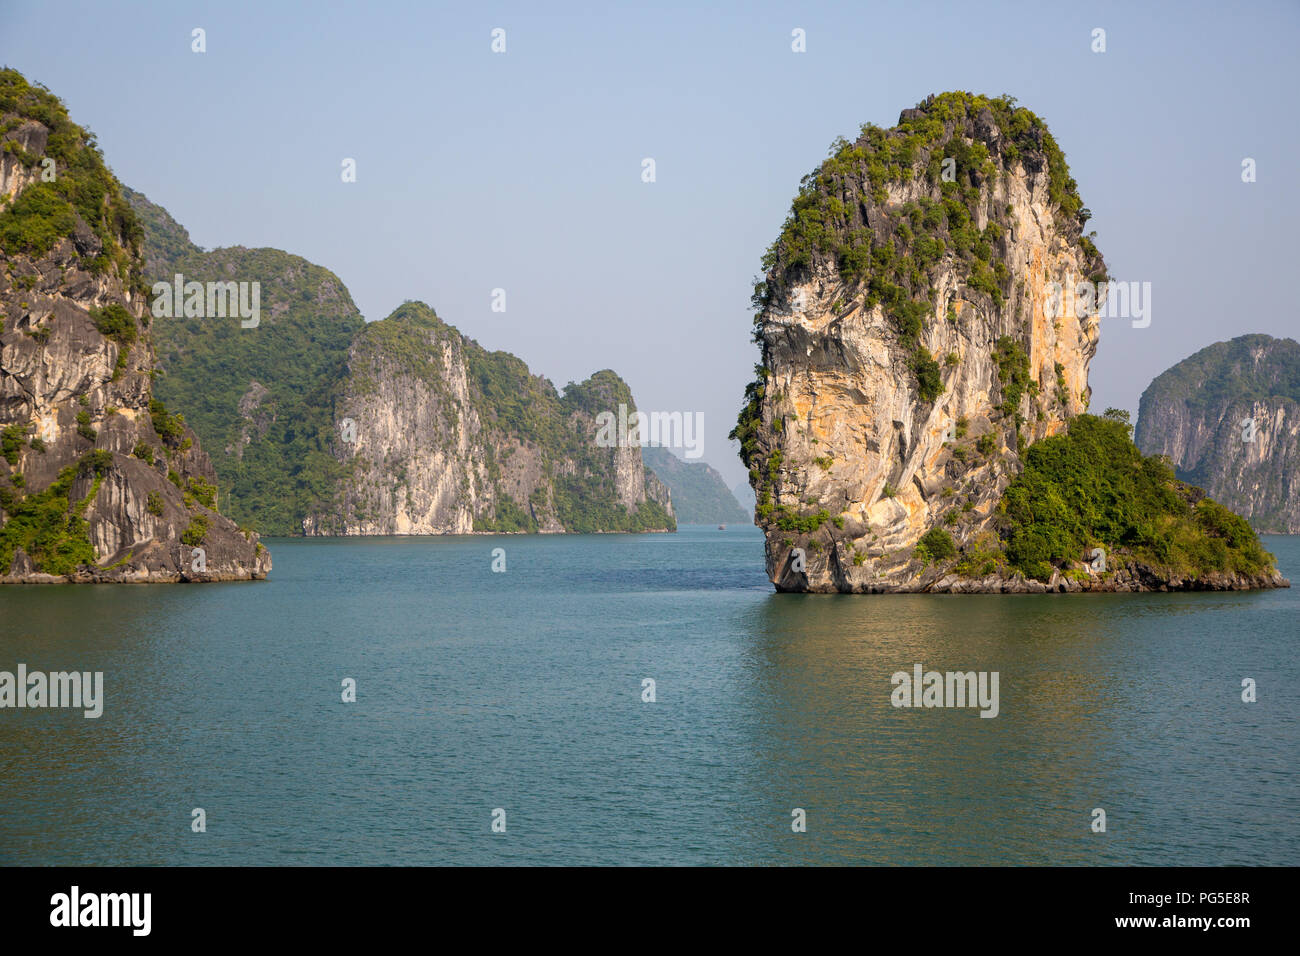 The islands of Halong Bay, northern Vietnam Stock Photo